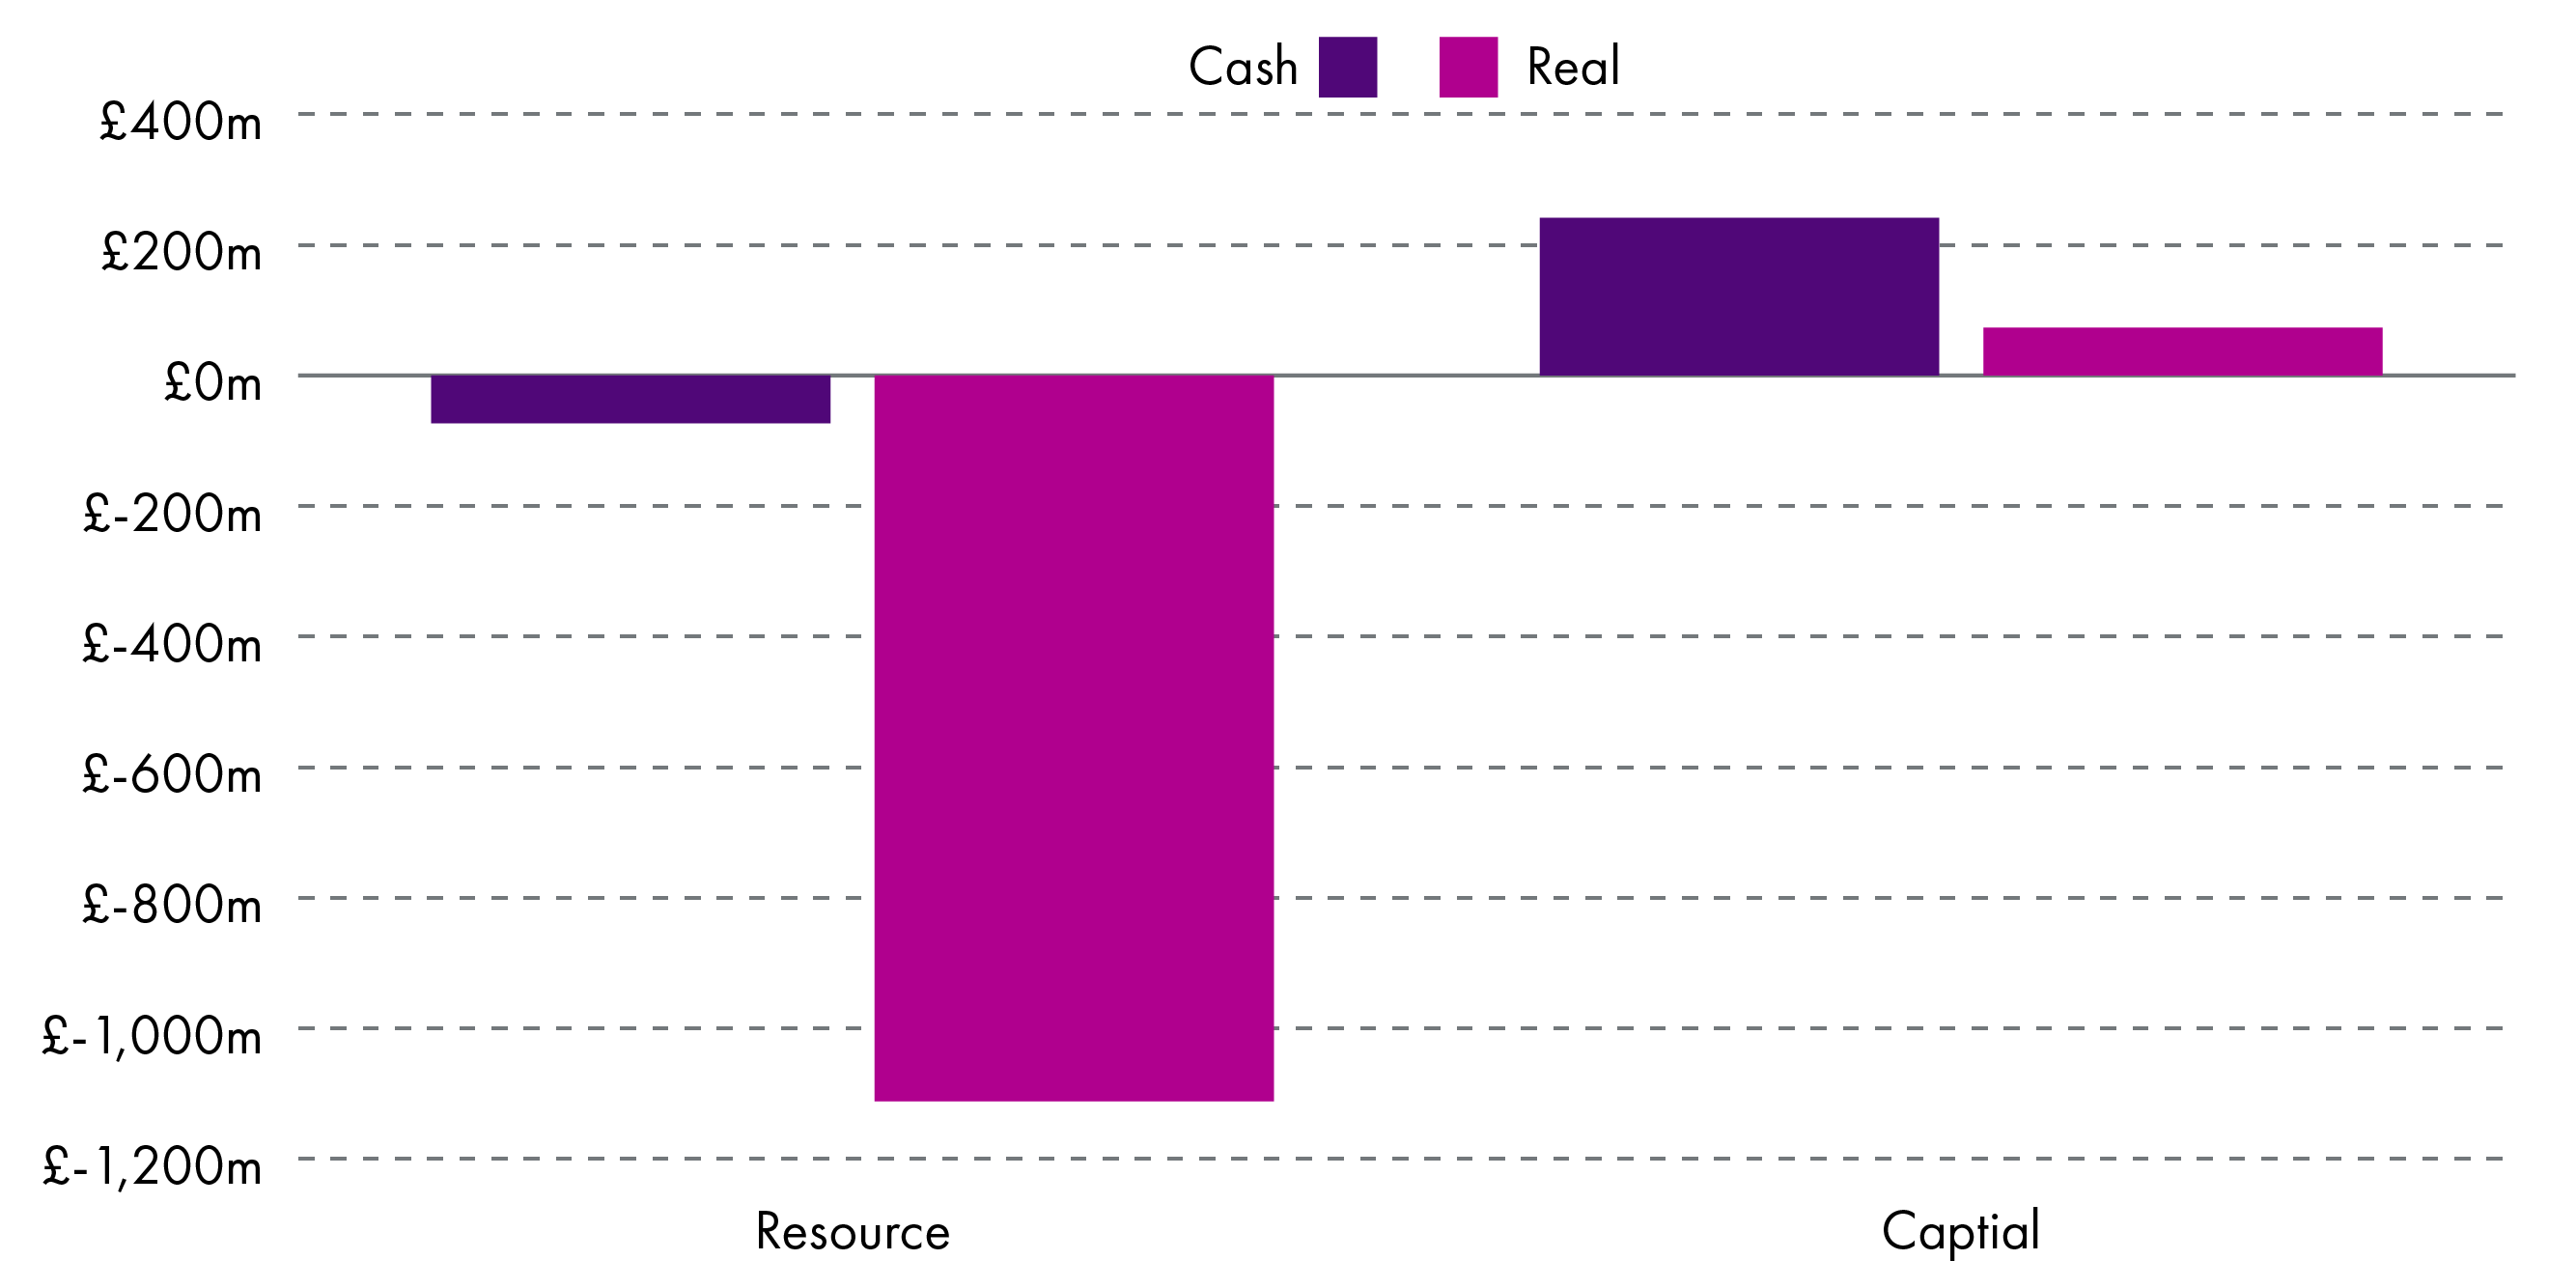 Figure 2 shows the absolute change in Resource and Capital presented in the document between 2021-22 and 2022-23. Resource decreases by more than £1,000 million and capital increases by around £50 million in real terms.